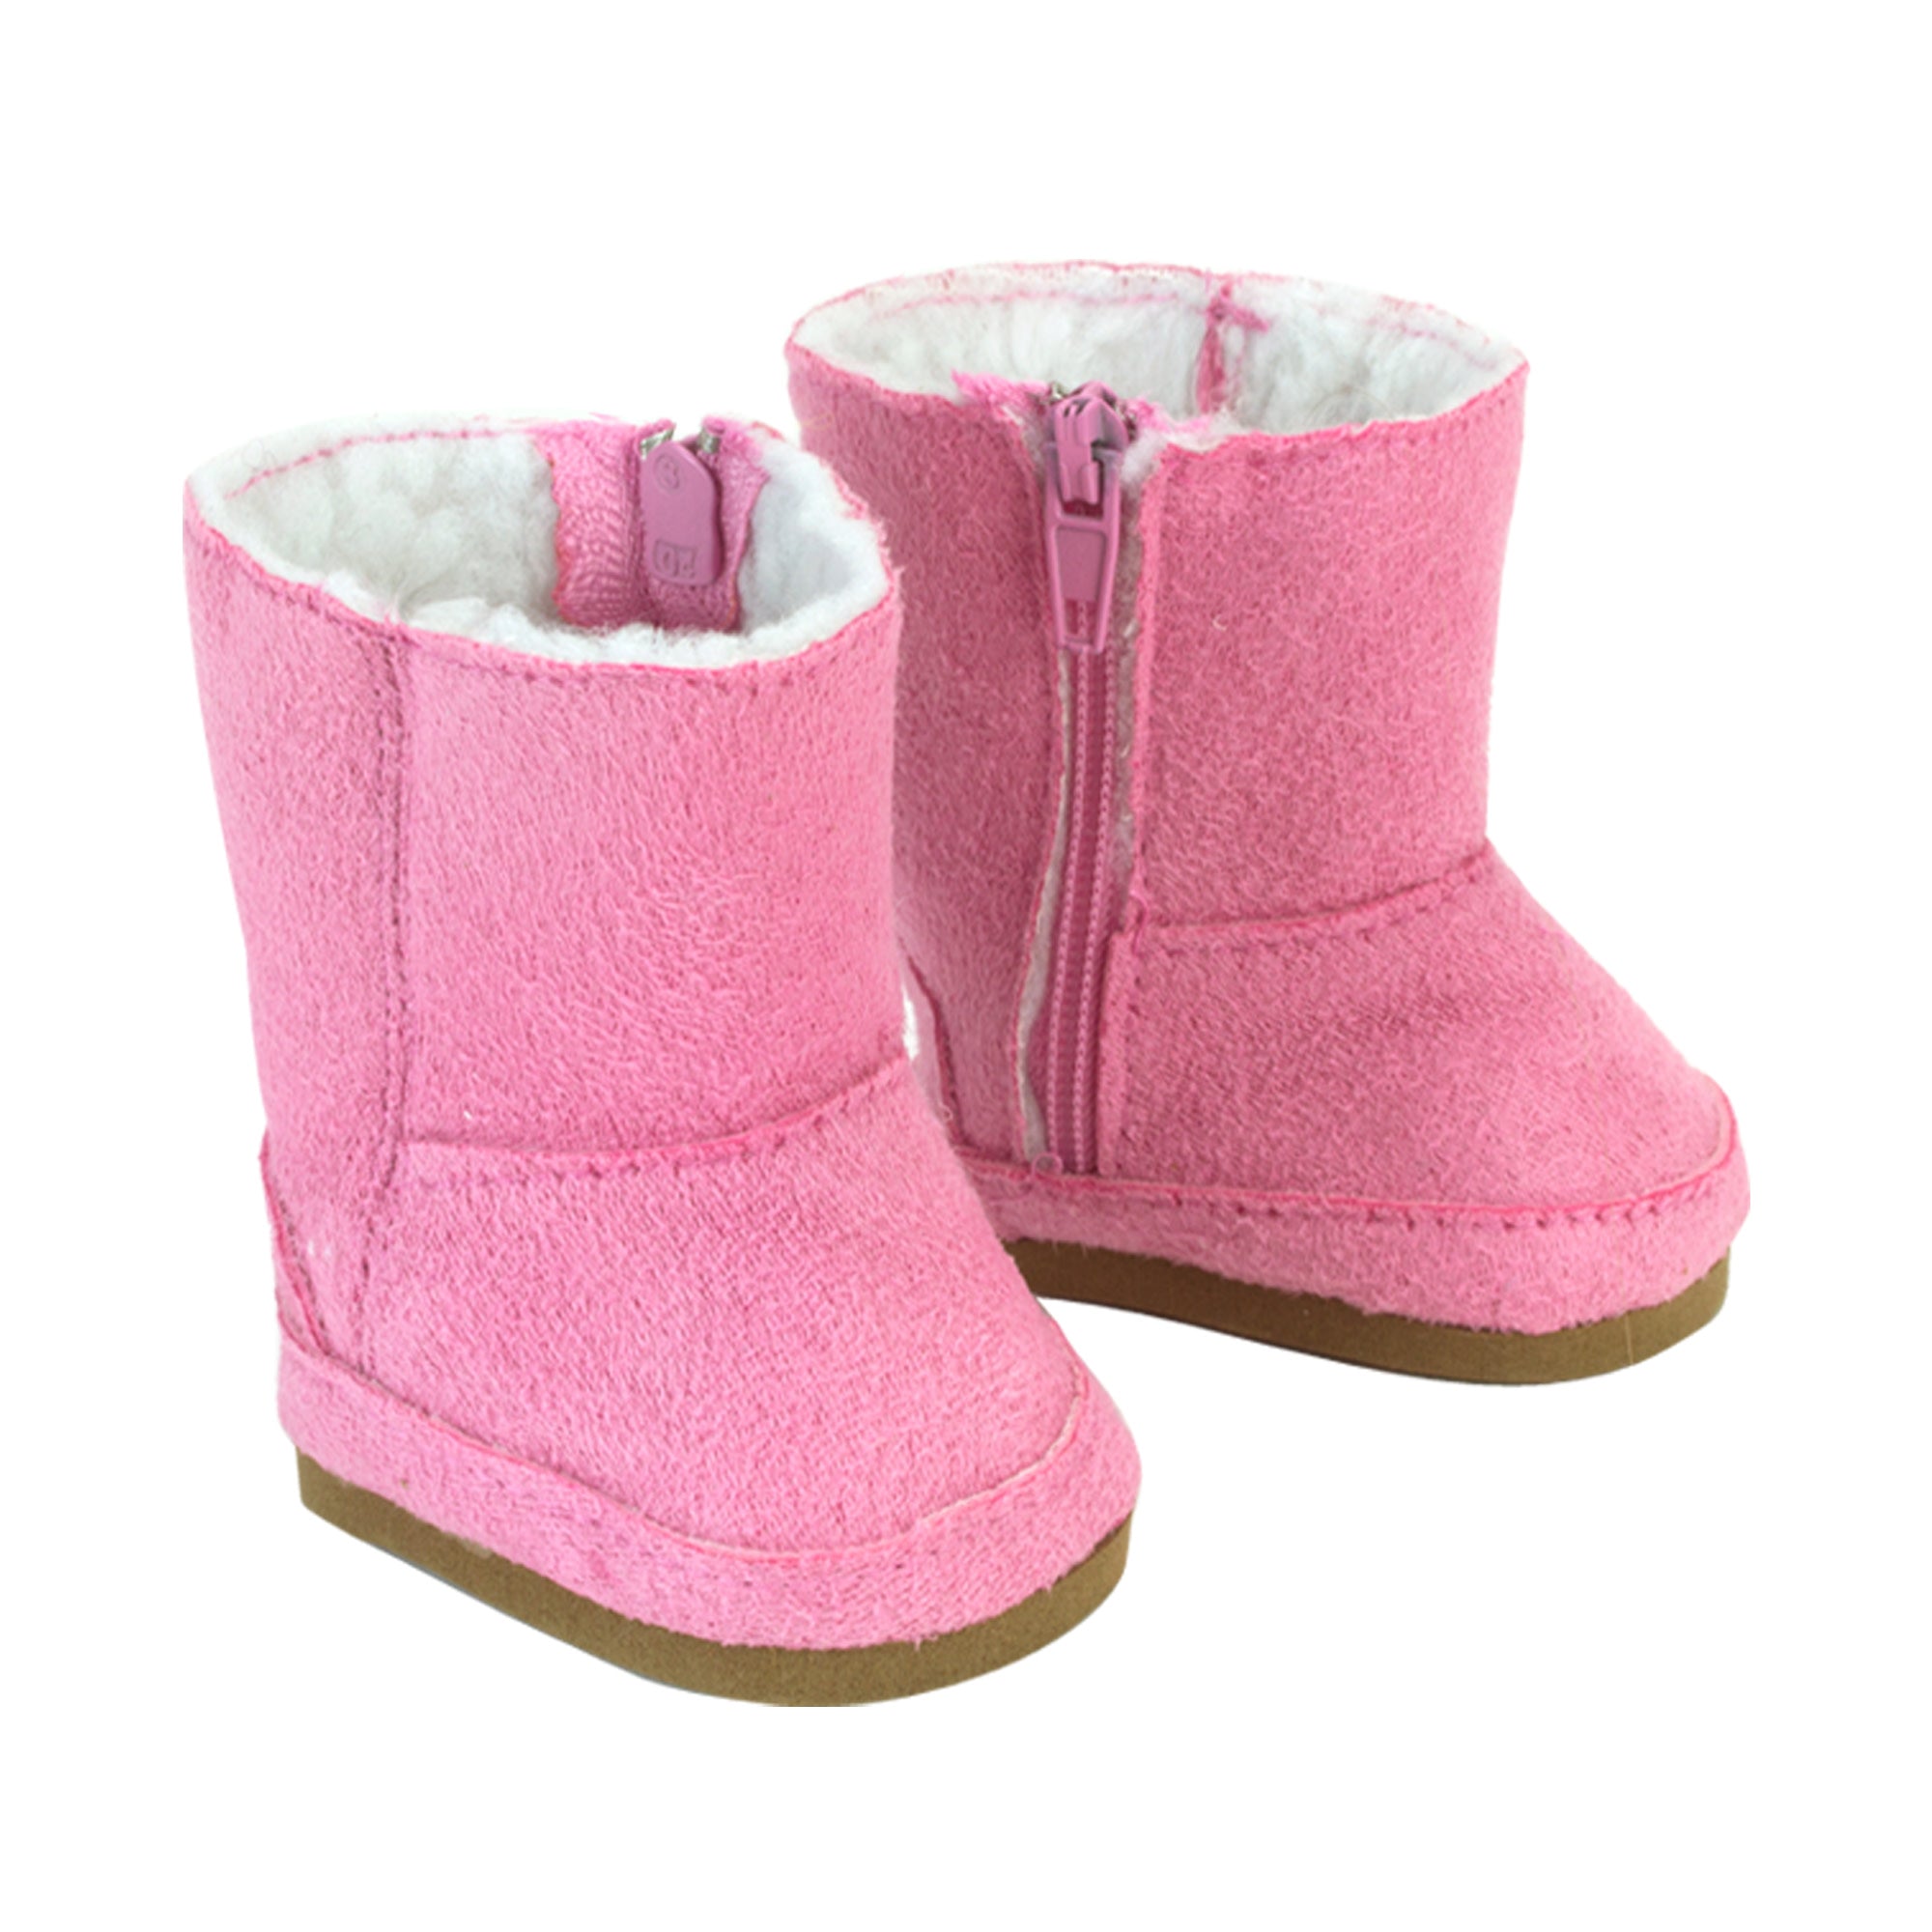 Sophia's 2-Pair, Winter Boots for 18" Dolls, Pink/Gray